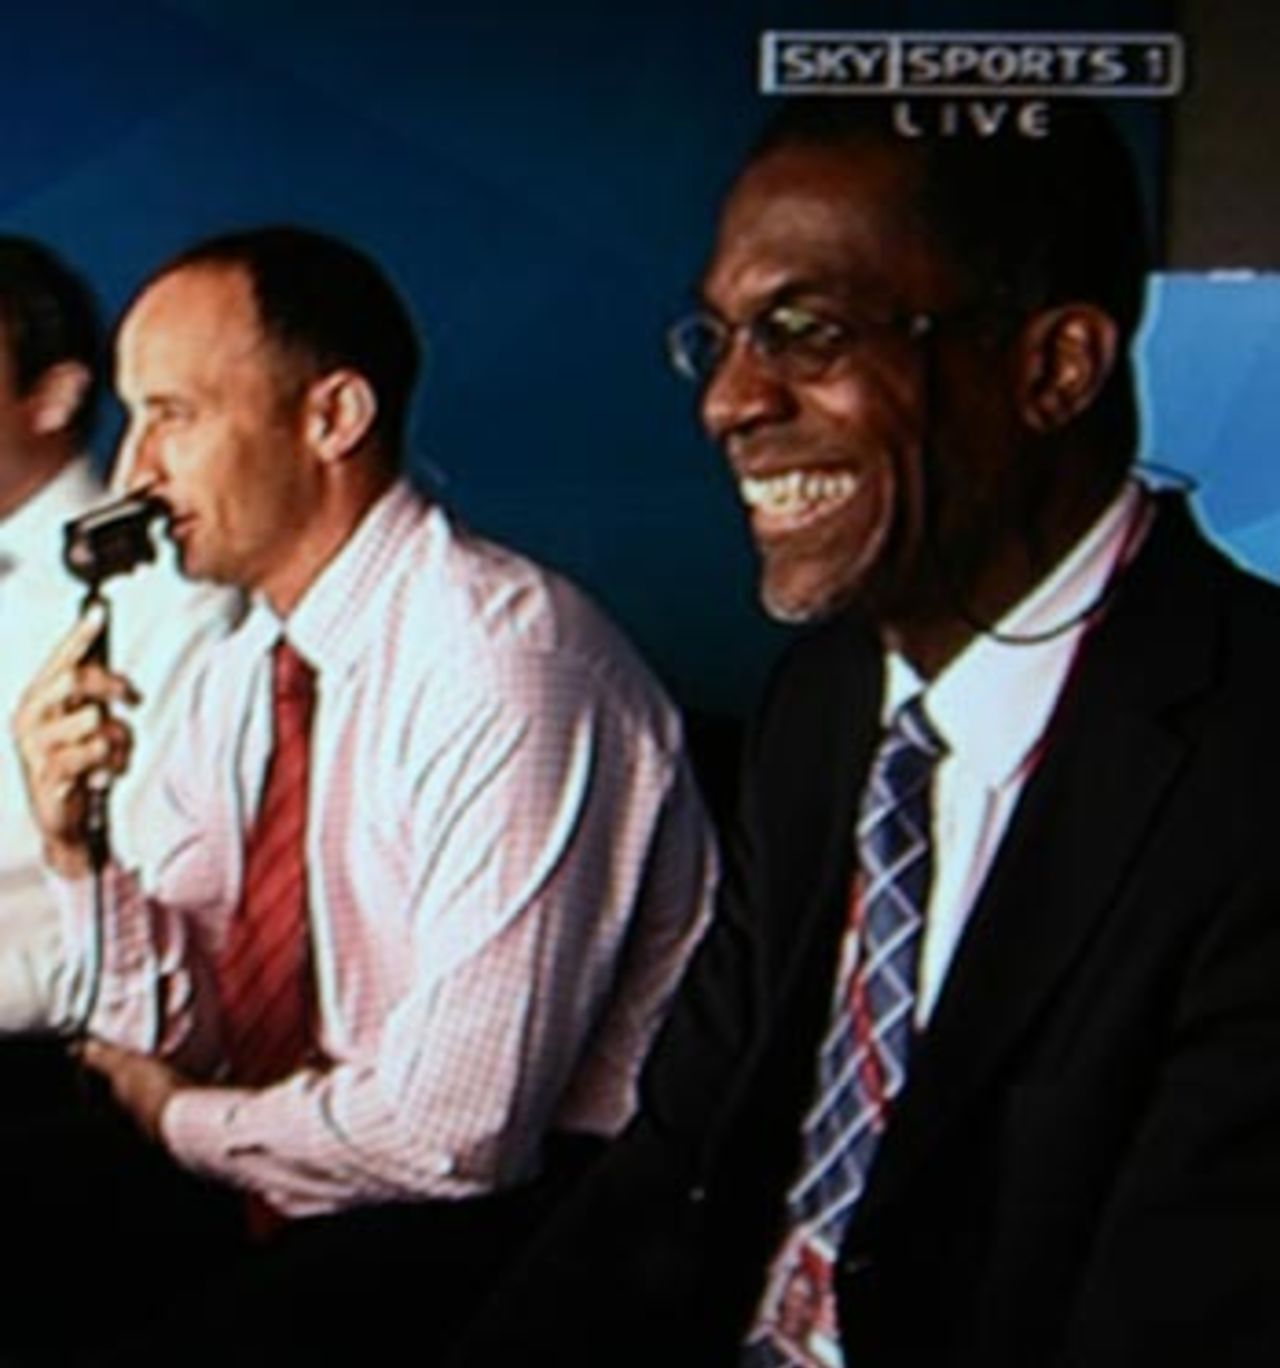 Nasser Hussain and Michael Holding in the Sky Sports commentary box, June 6, 2006